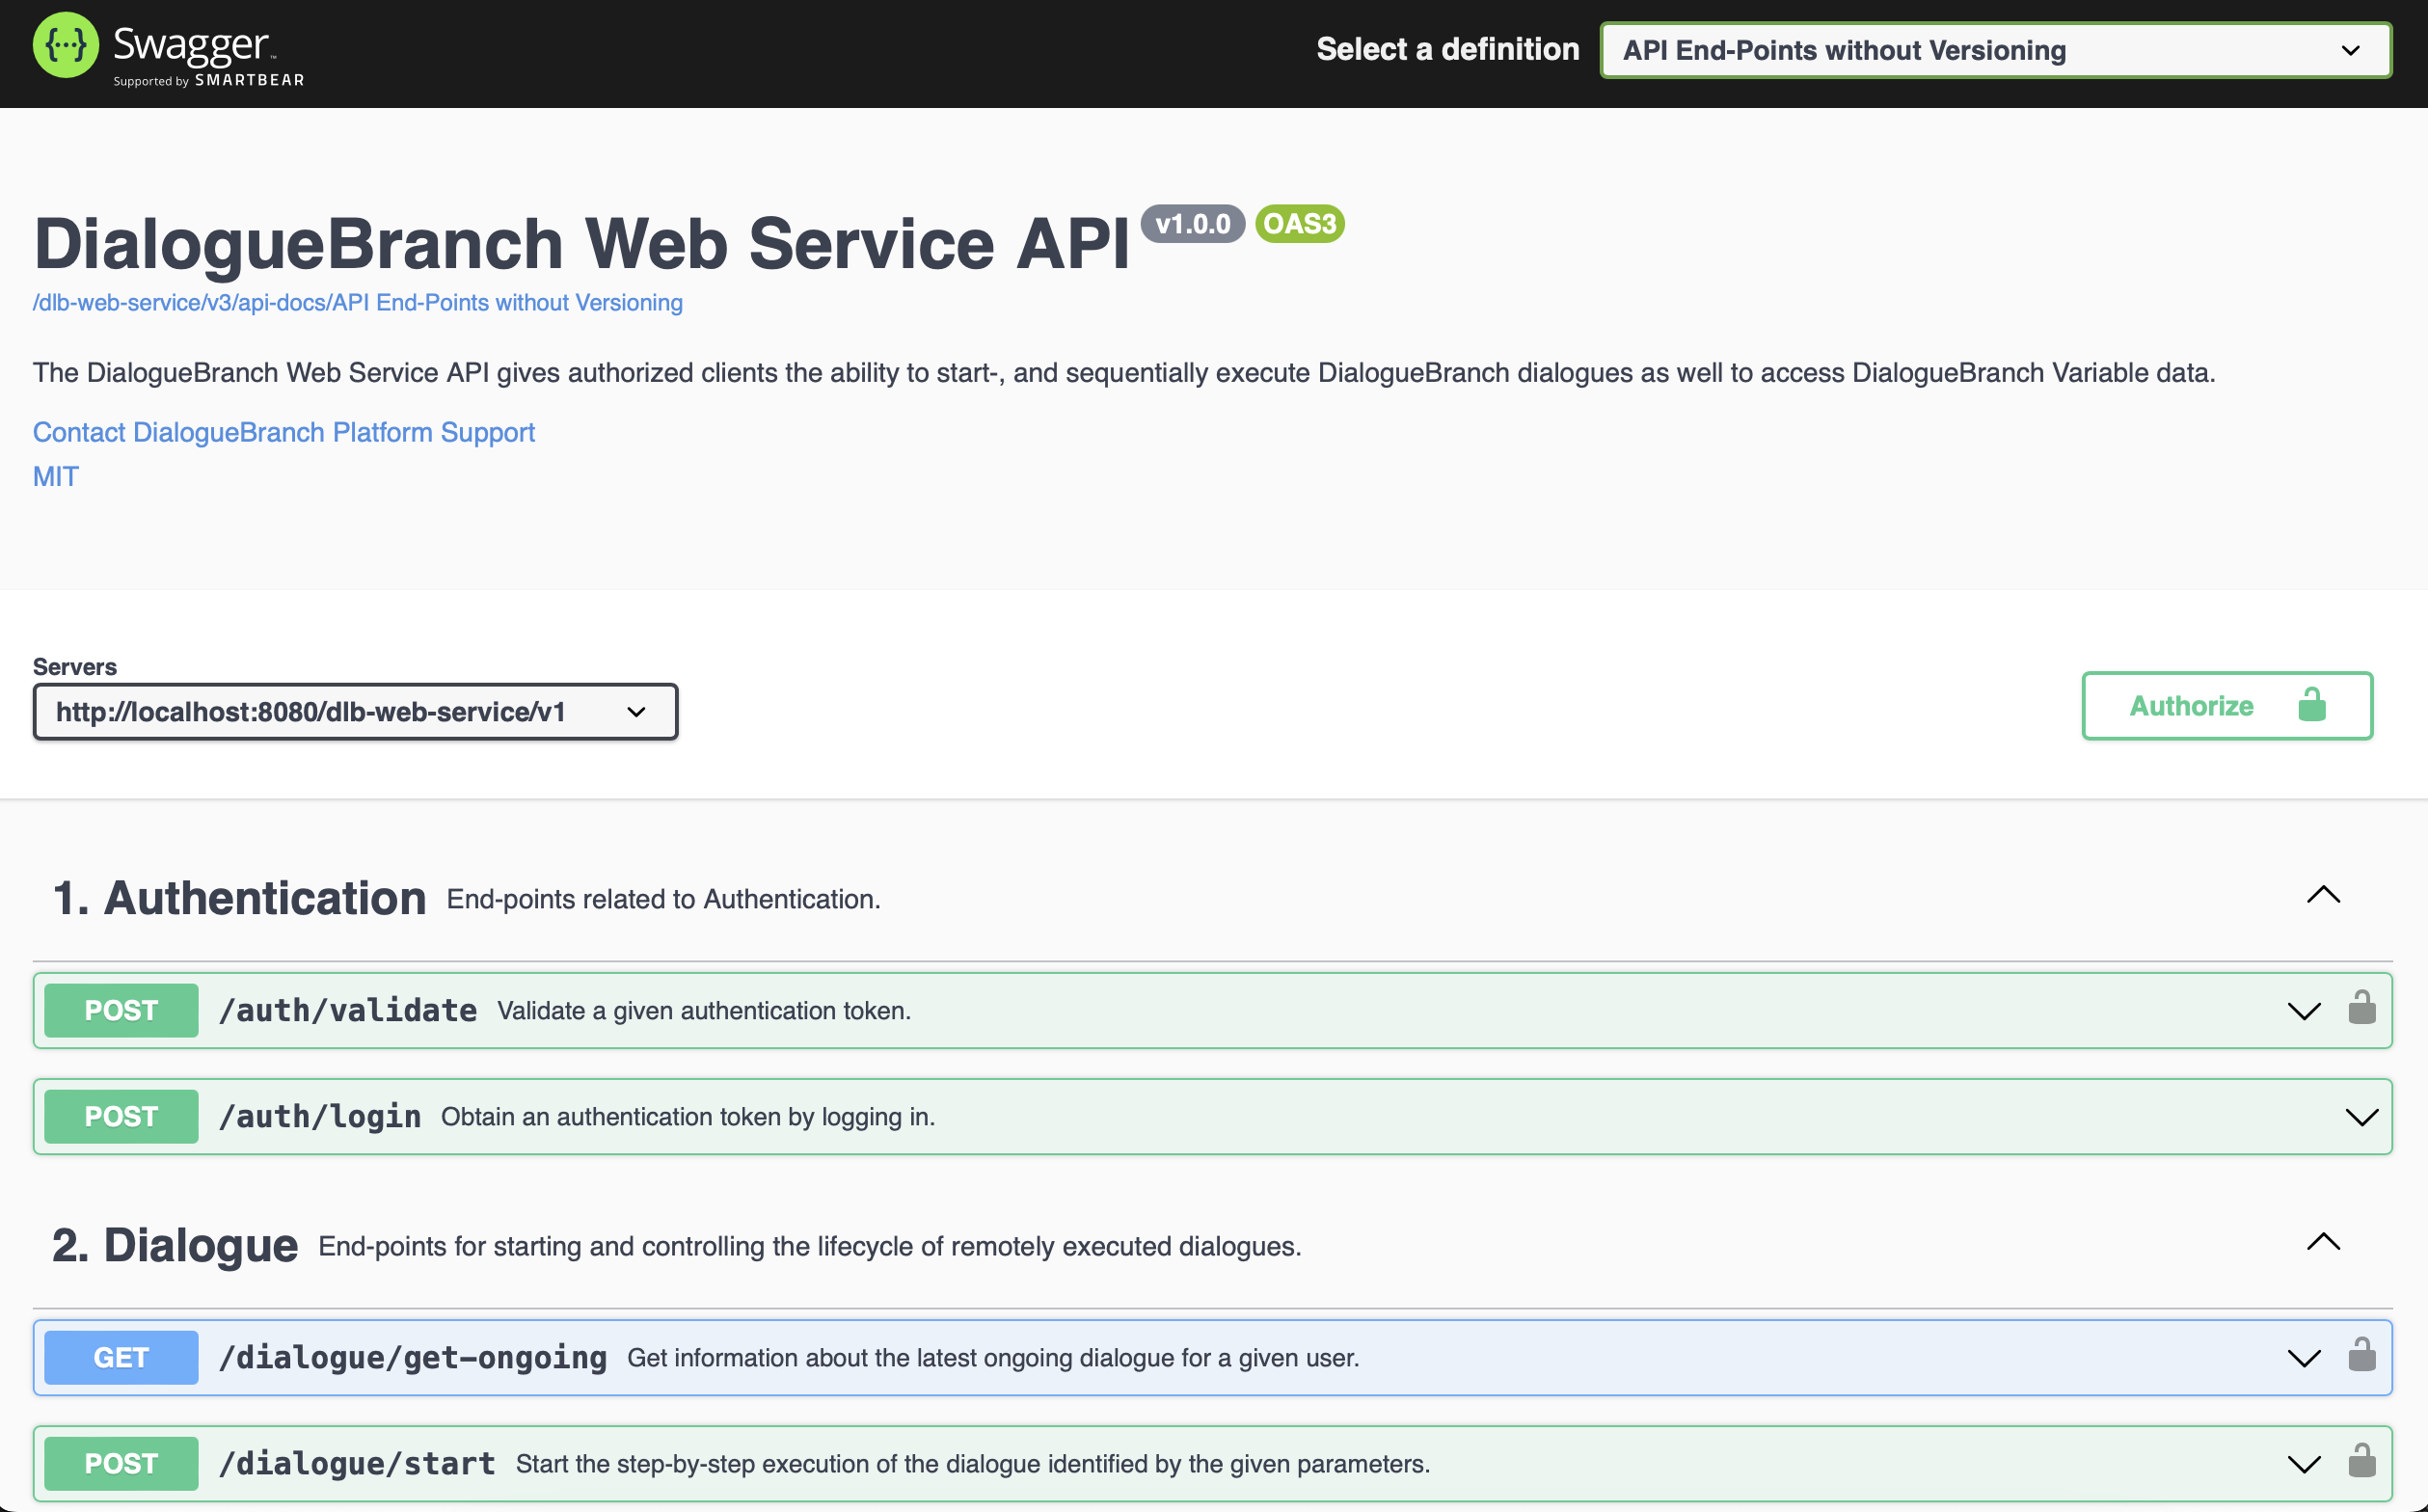 webservice setup tutorial 1 swagger